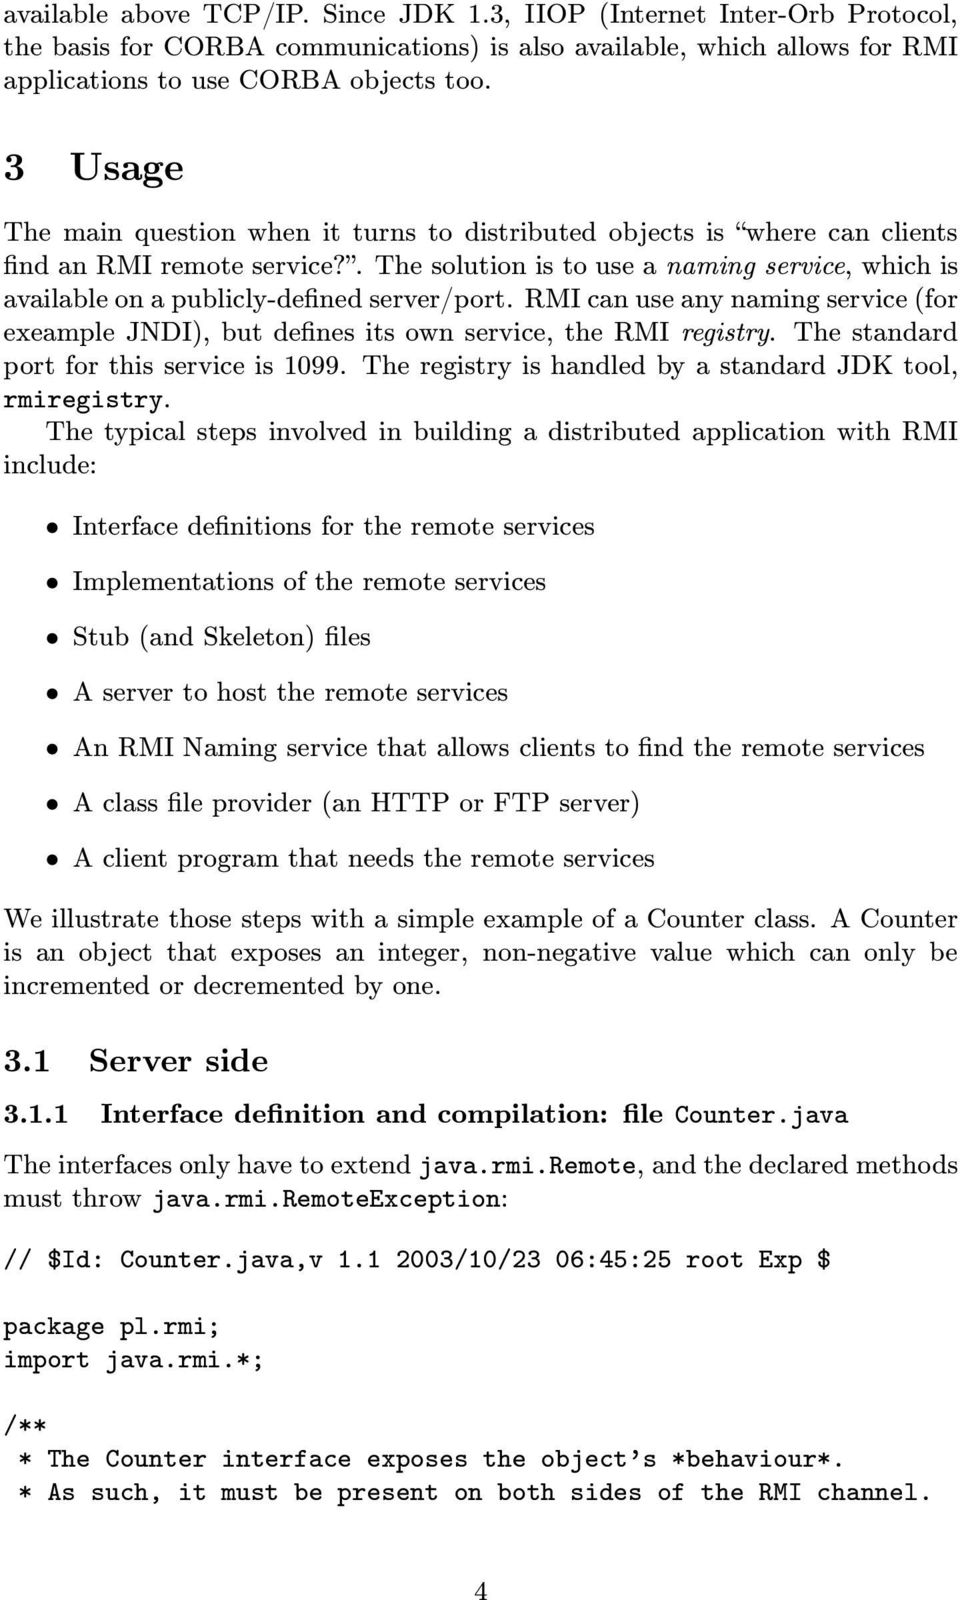 . The solution is to use a naming service, which is available on a publicly-defined server/port. RMI can use any naming service (for exeample JNDI), but defines its own service, the RMI registry.